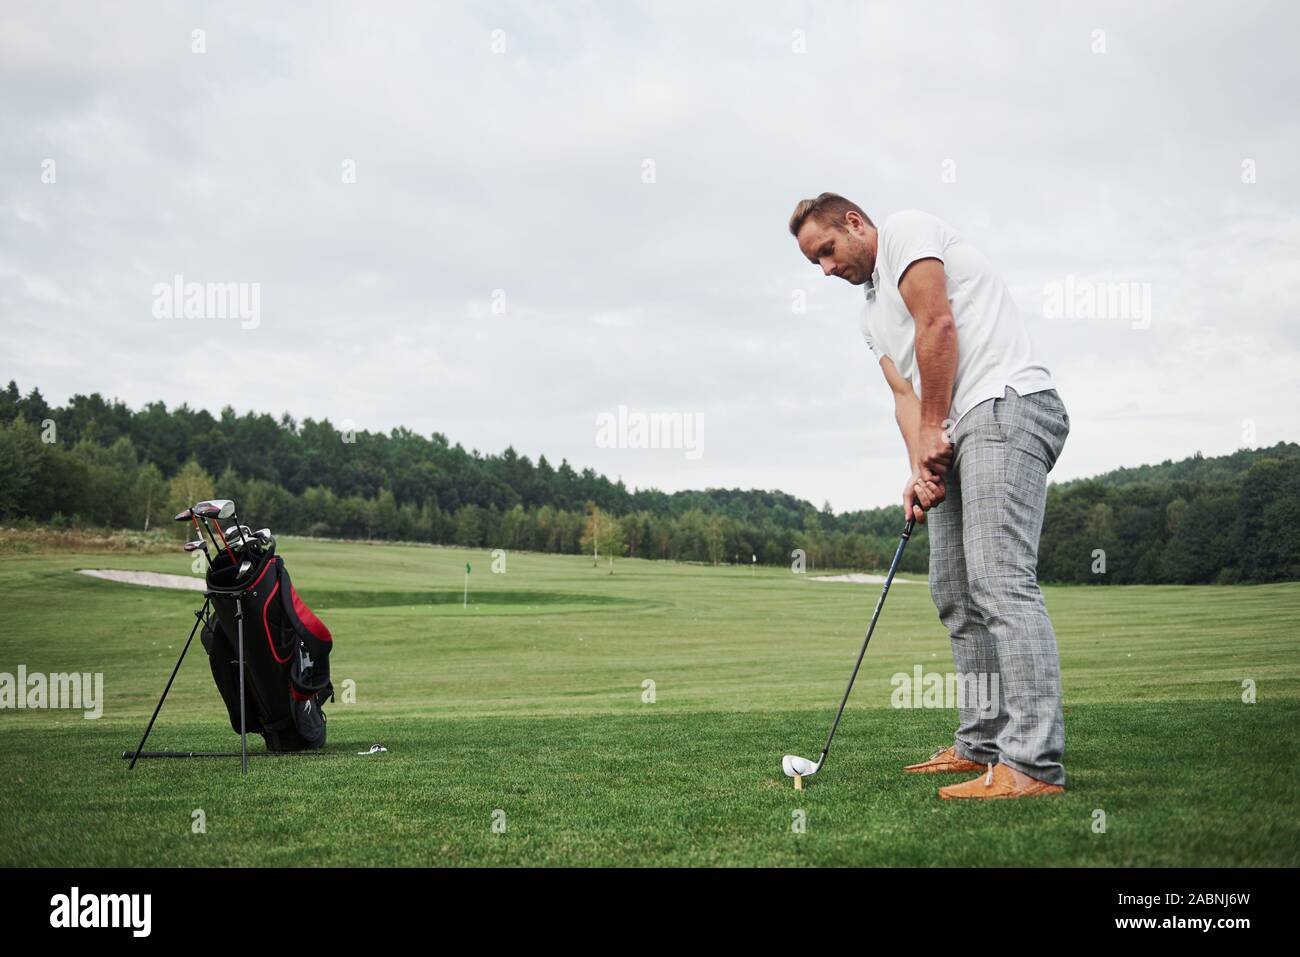 Pro golf player aiming shot with club on course. Male golfer on putting green about to take the hit Stock Photo